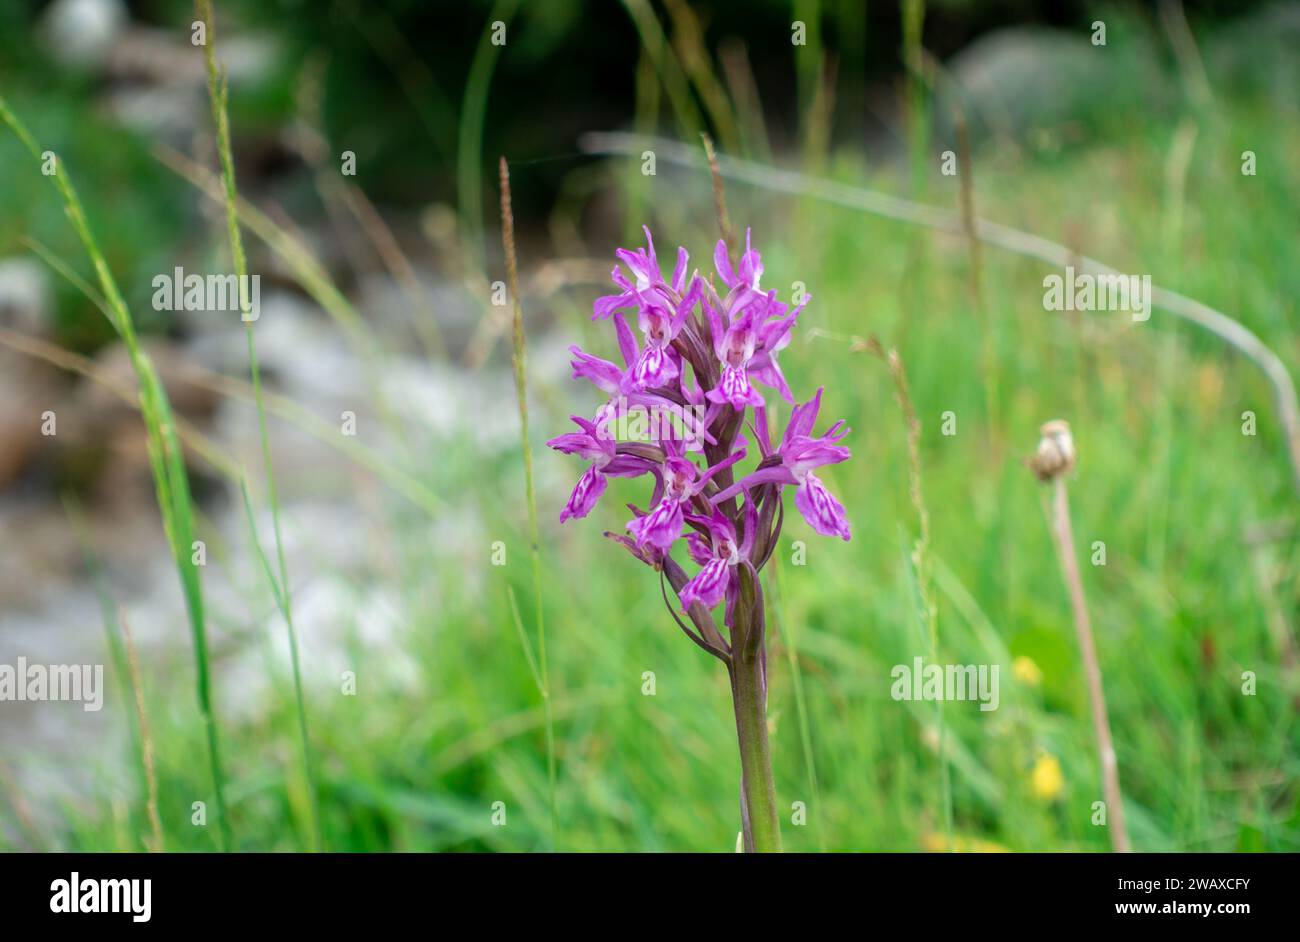 Dactylorhiza sambucina violet. Orchid. Traunsteiner's fingerroot. A species of herbaceous plants from the genus Palmaceae of the Orchidaceae family Stock Photo